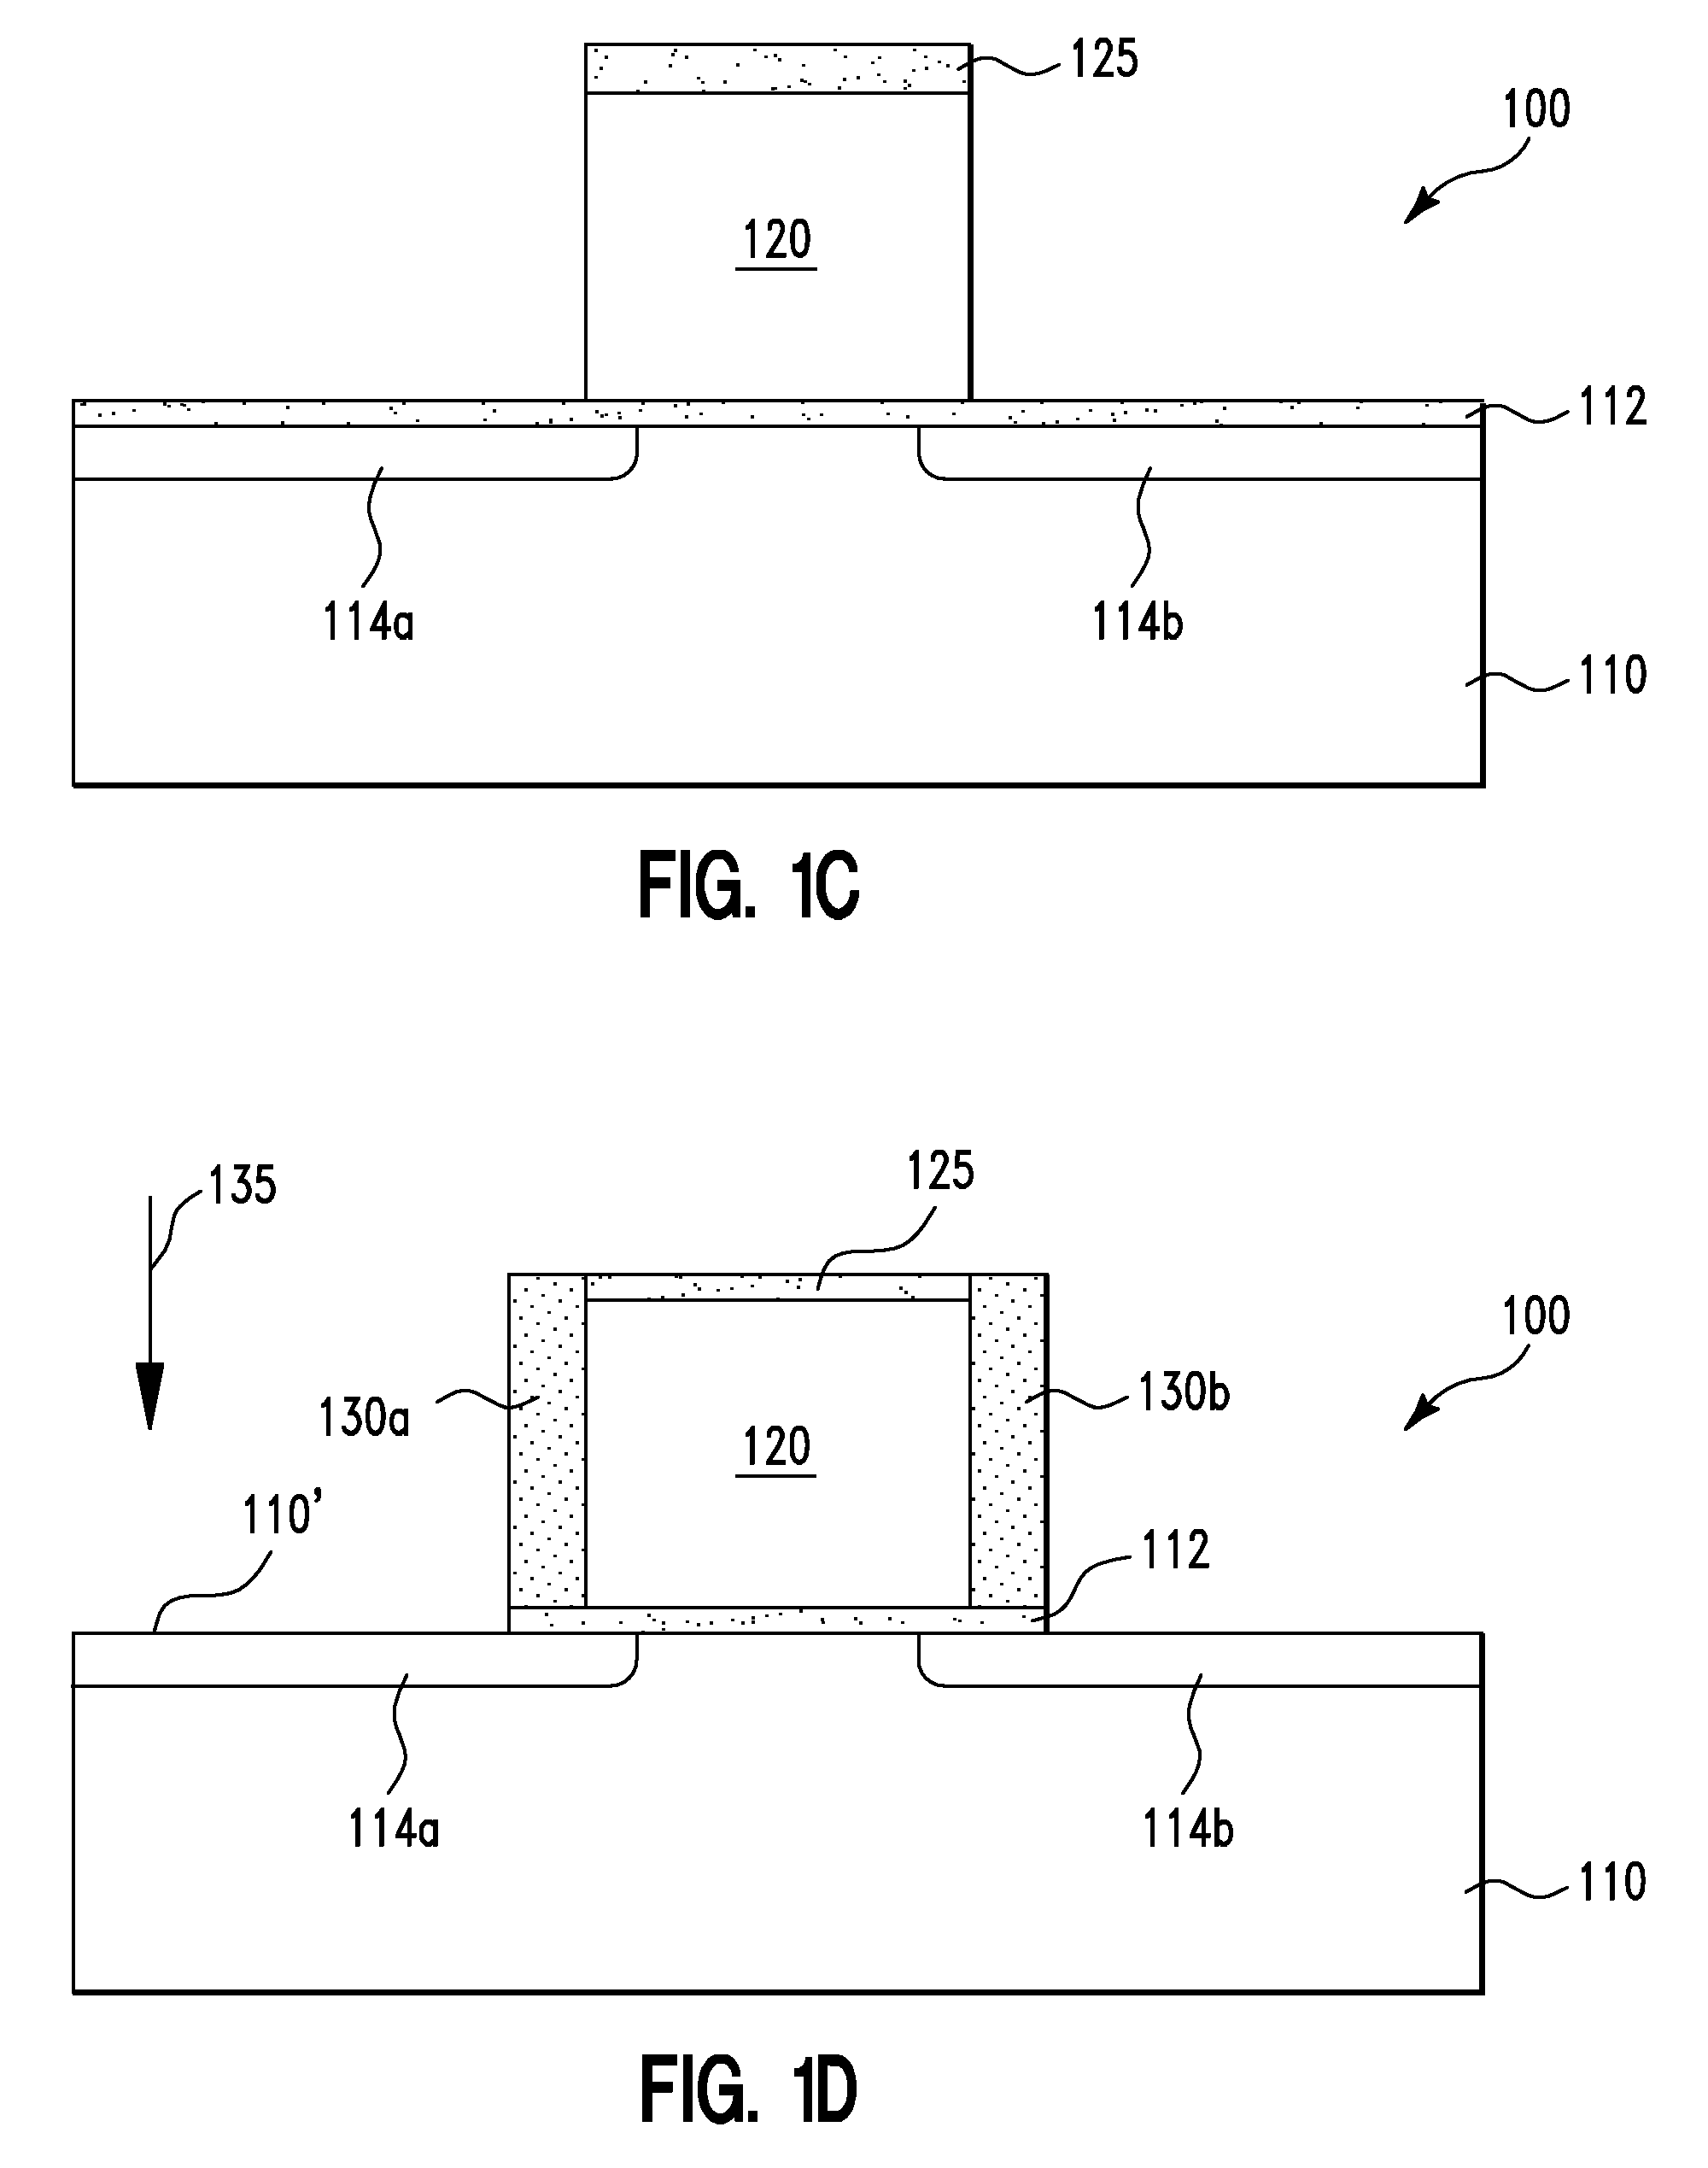 Semiconductor transistors having high-K gate dielectric layers, metal gate electrode regions, and low fringing capacitances